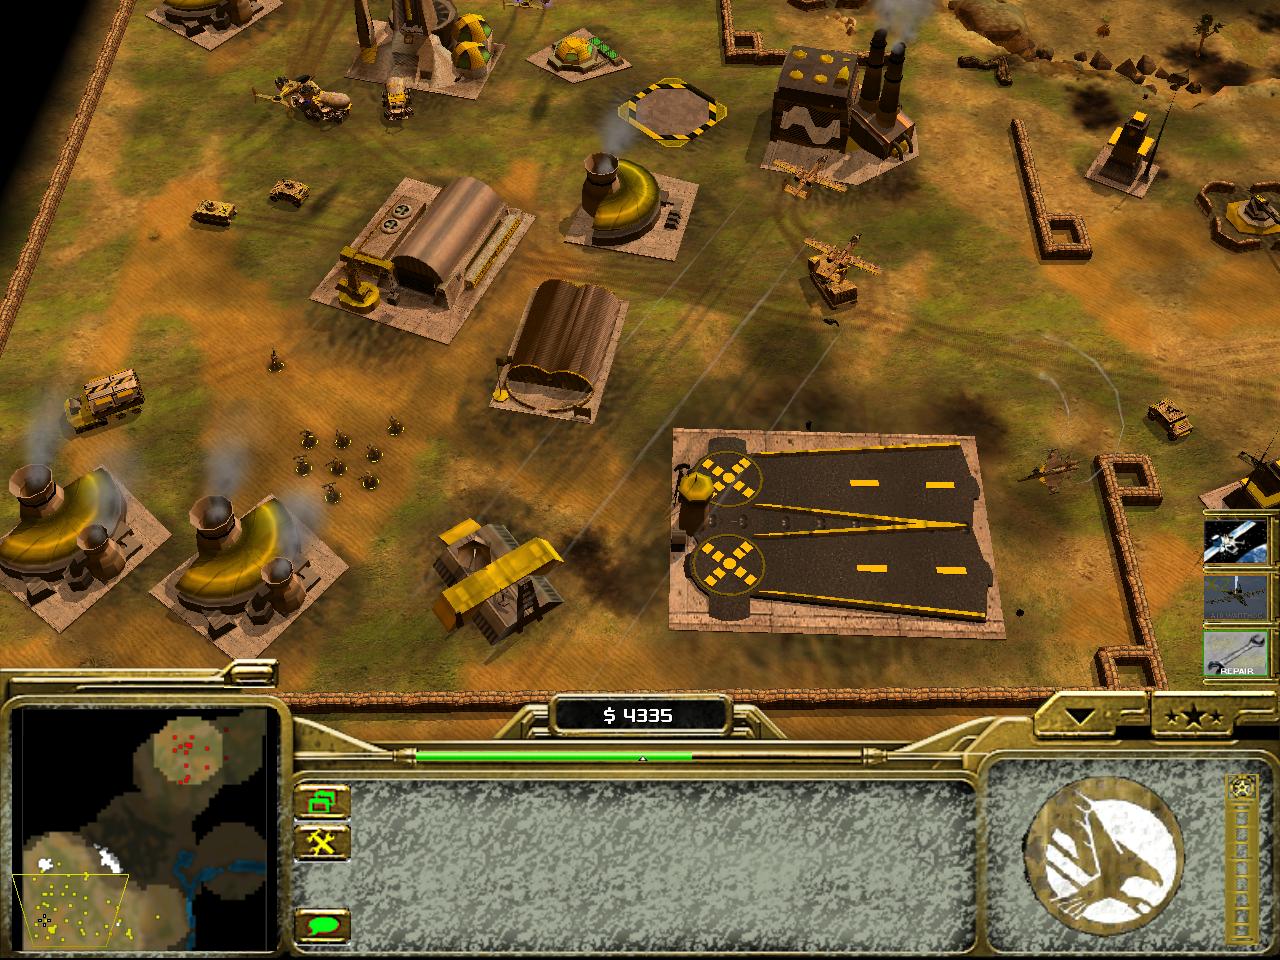 all command and conquer keygen